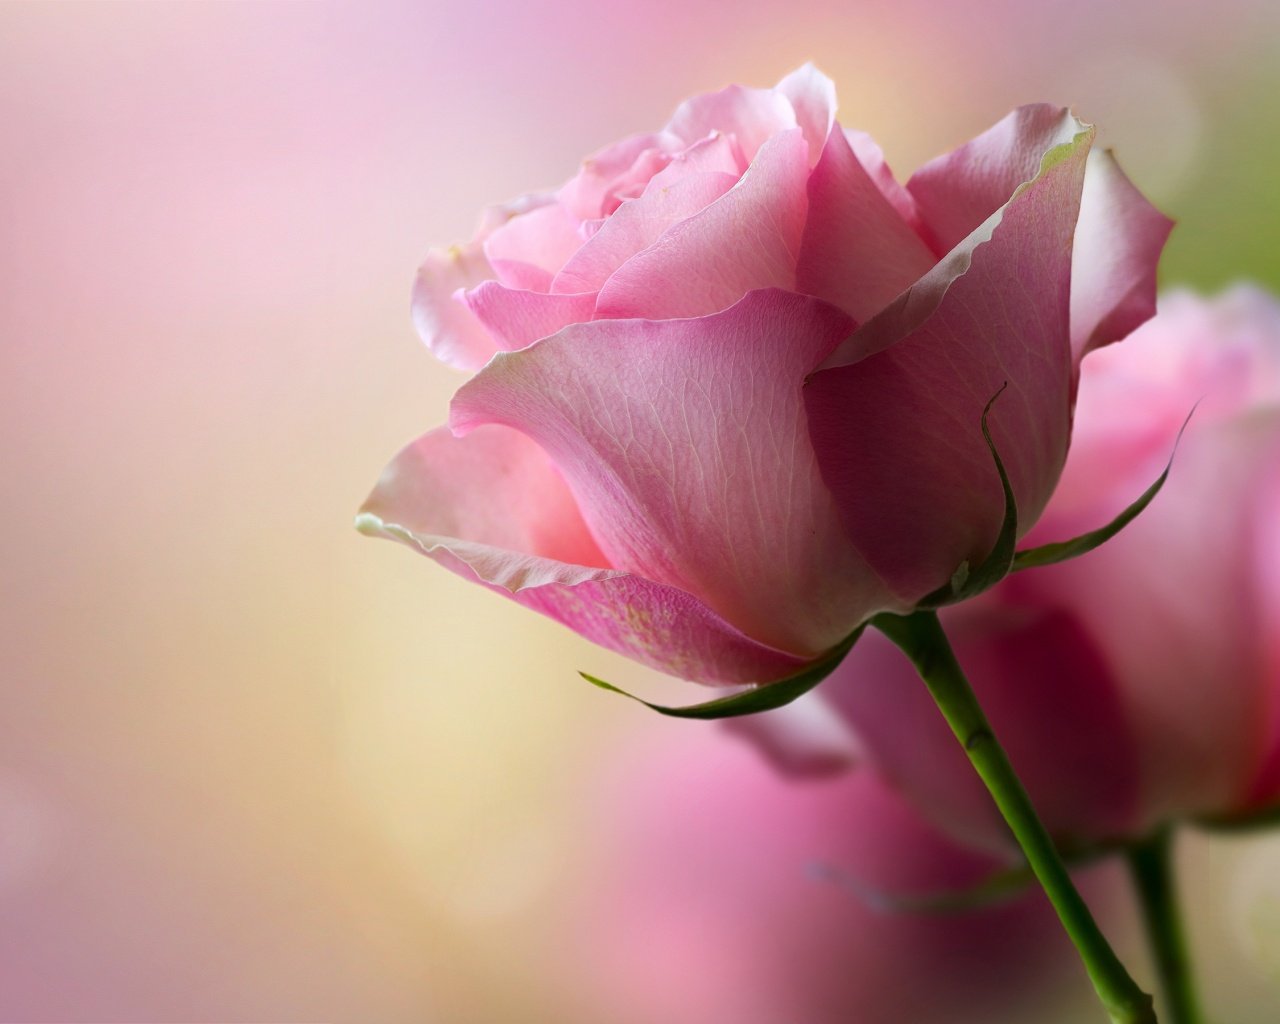 Pink Rose Wallpaper 11012 Hd Wallpapers in Flowers   Imagescicom 1280x1024